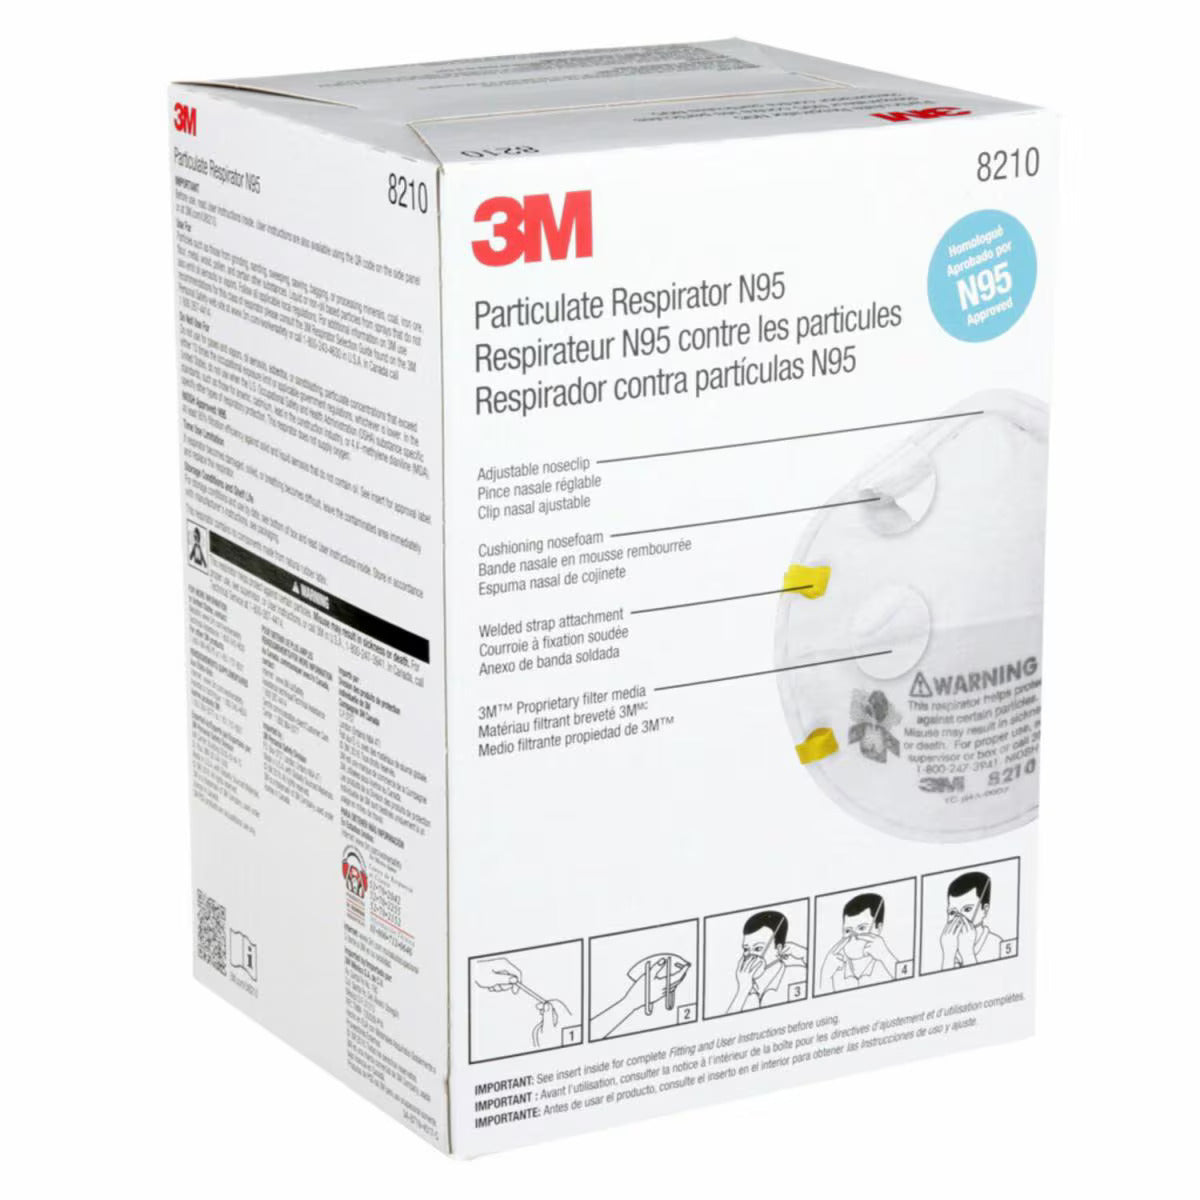 3M 8210 package view